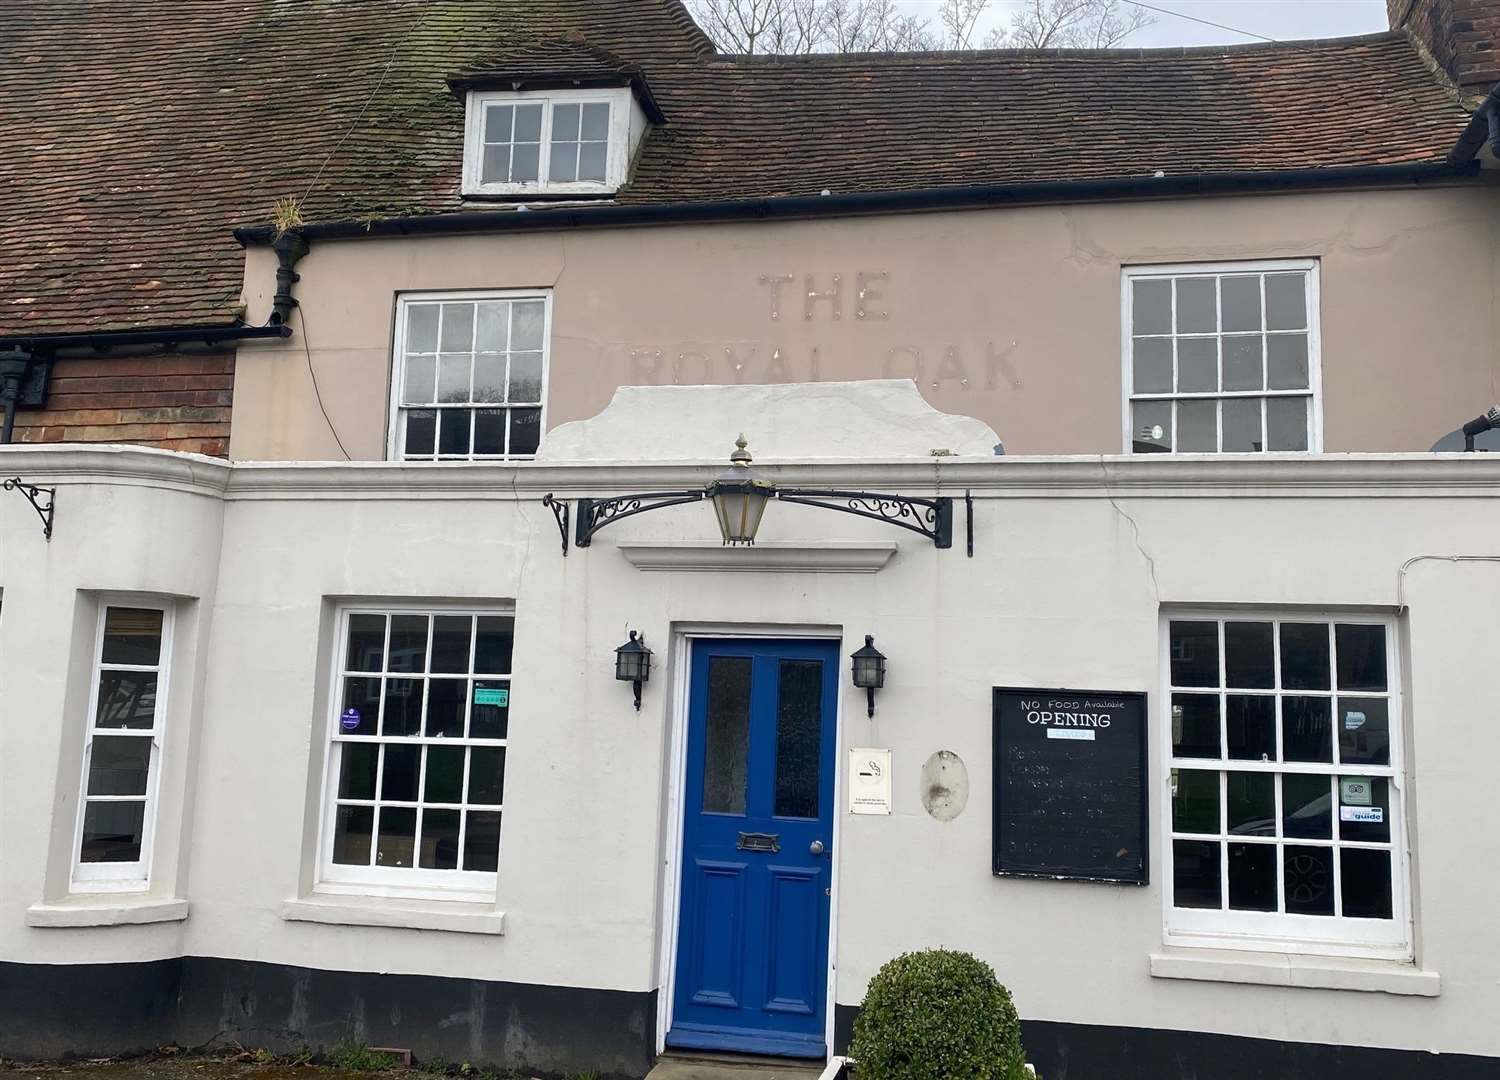 How the former pub currently looks - its Shepherd Neame signs have now been removed. Picture: Barry Goodwin